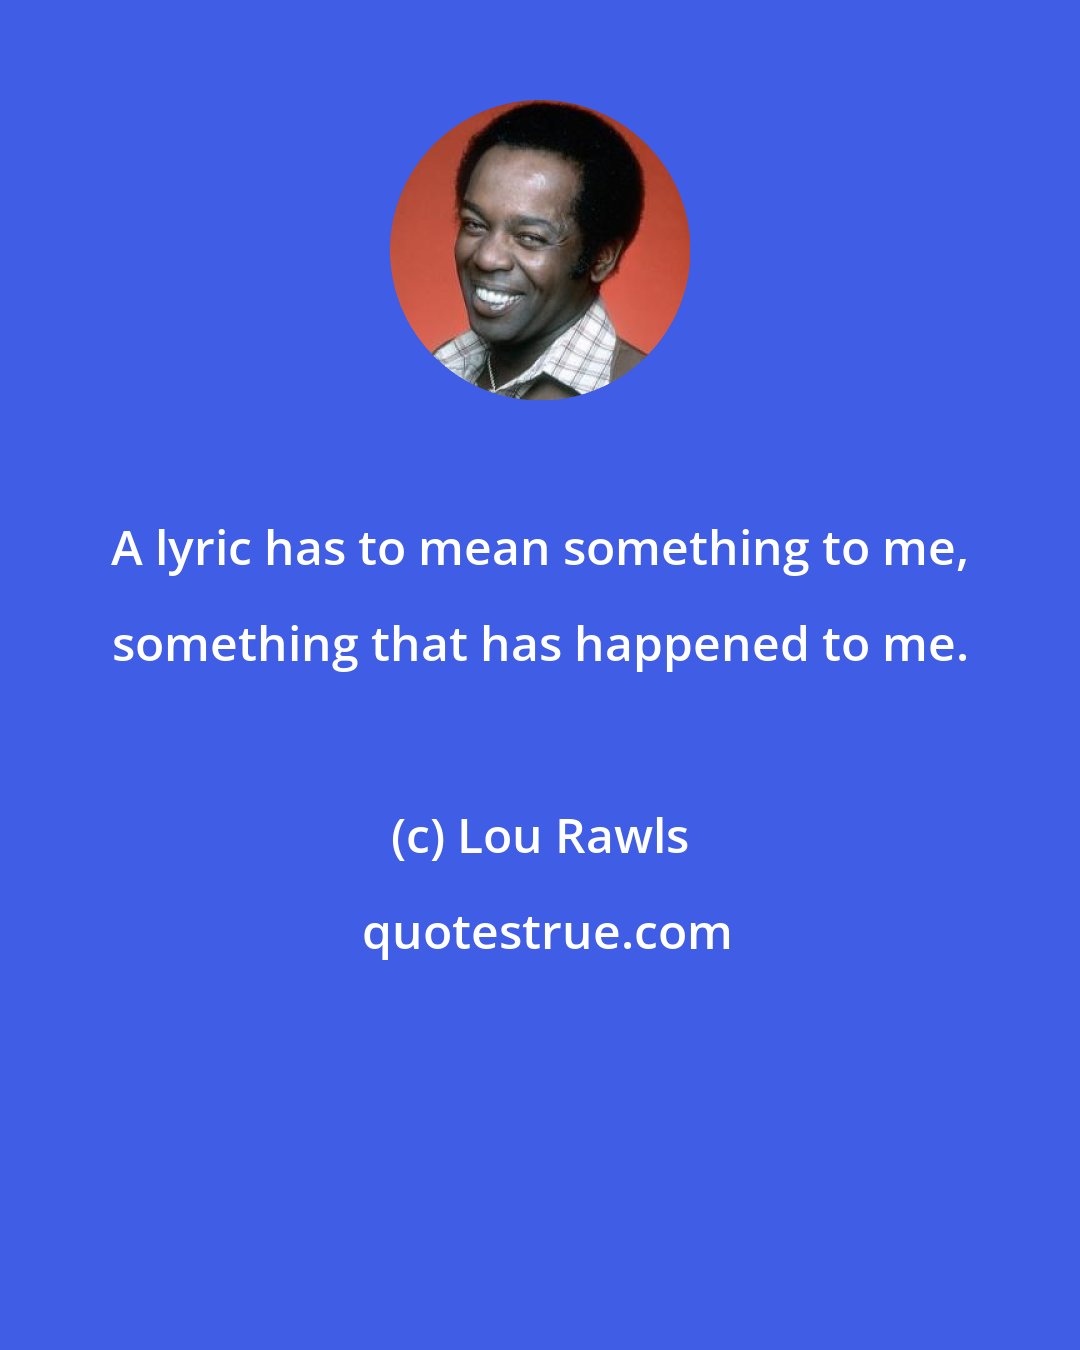 Lou Rawls: A lyric has to mean something to me, something that has happened to me.